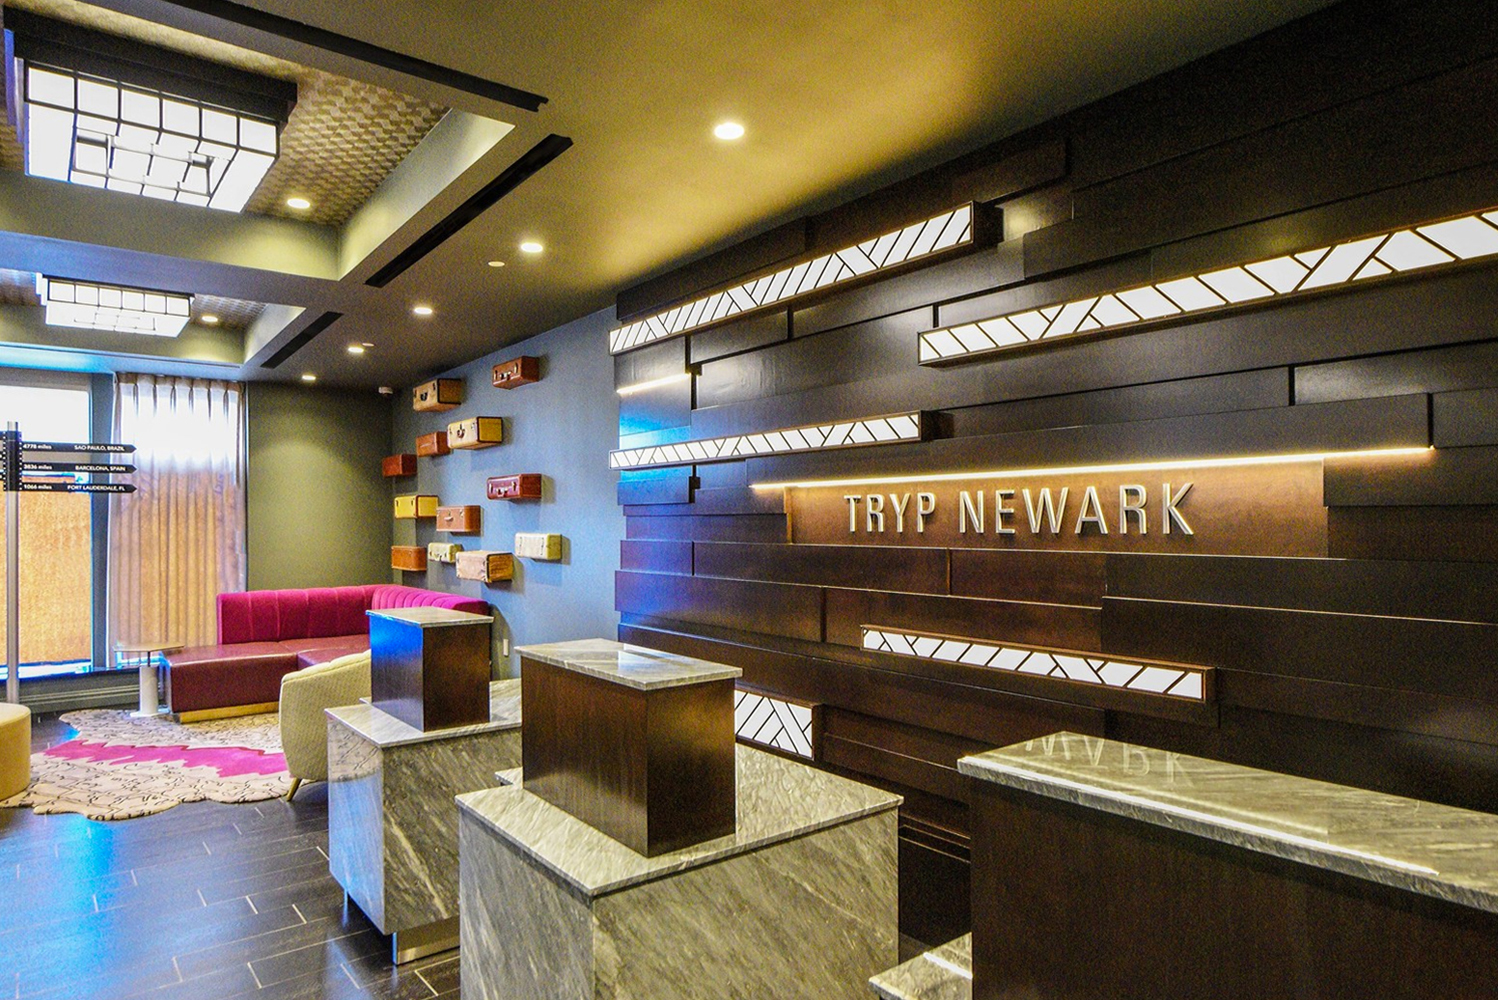 Wyndham Hotel Group opened its latest TRYP by Wyndham hotel in downtown Newark NJ 